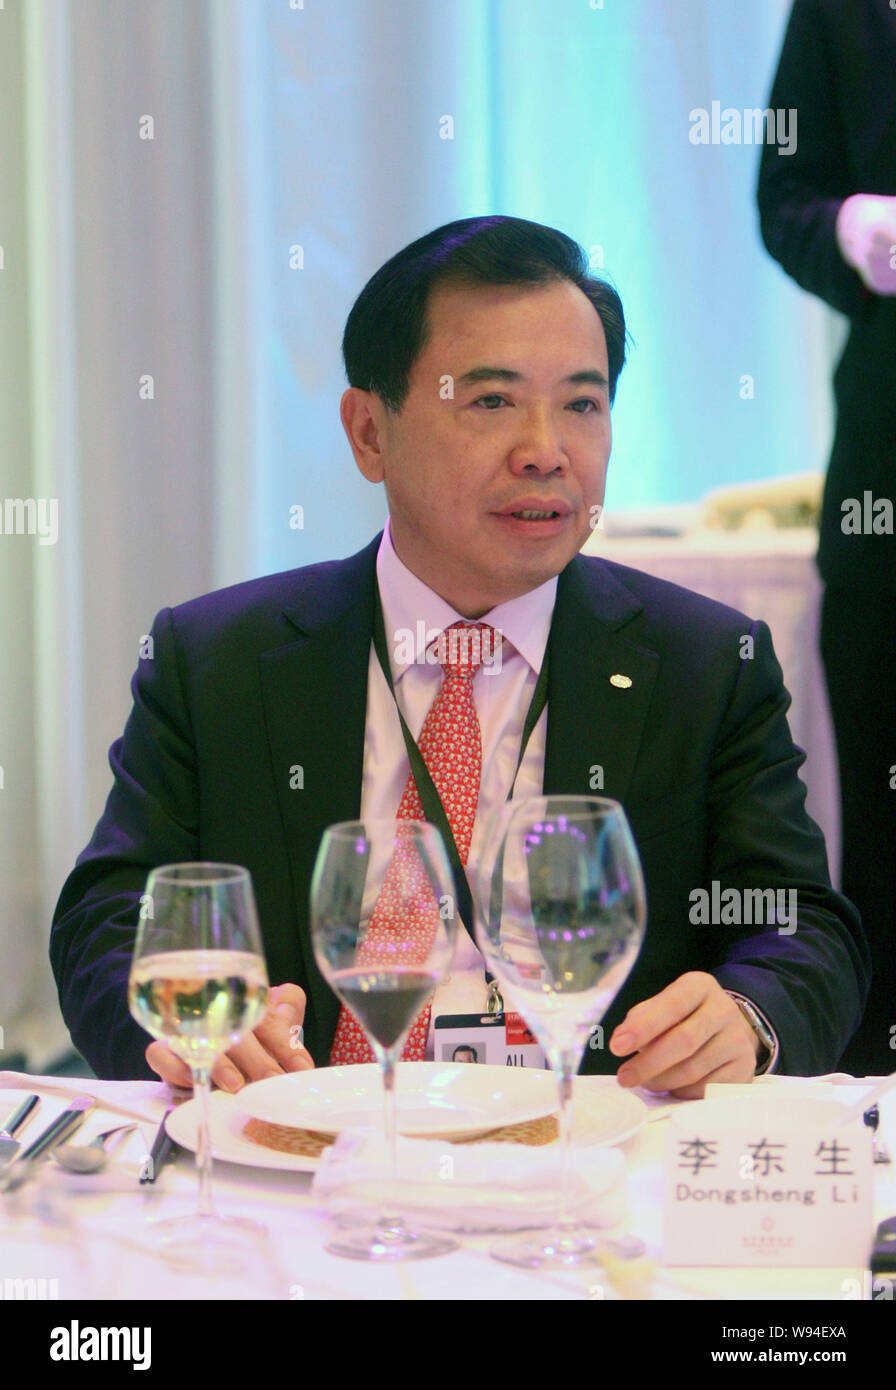 Li Dongsheng, Chairman of TCL Group, speaks at a banquet during the 12th Fortune Global Forum in Chengdu city, southwest Chinas Sichuan province, 7 Ju Stock Photo